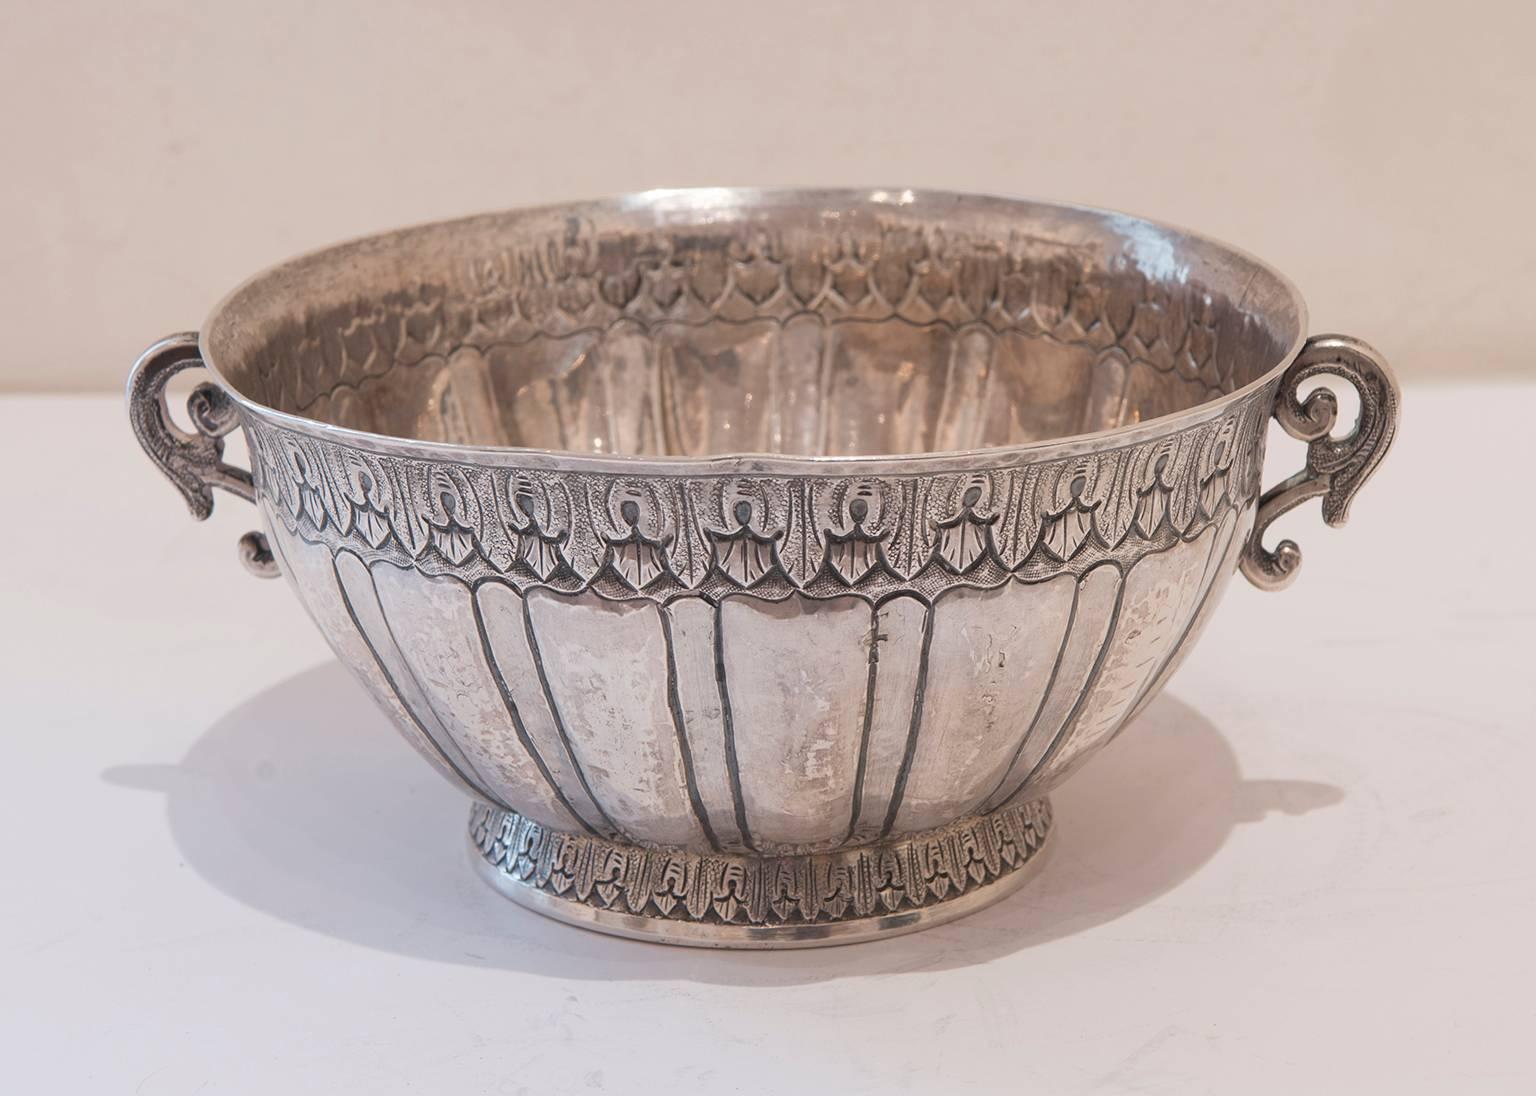 Circular, on circular foot, with lobed lower body, the slightly flared rim engraved with repetitive leaf motif, with two foliate scroll handles. The inside base of the bowl is engraved with three roses encircled by a wreath. Marker's marks are on